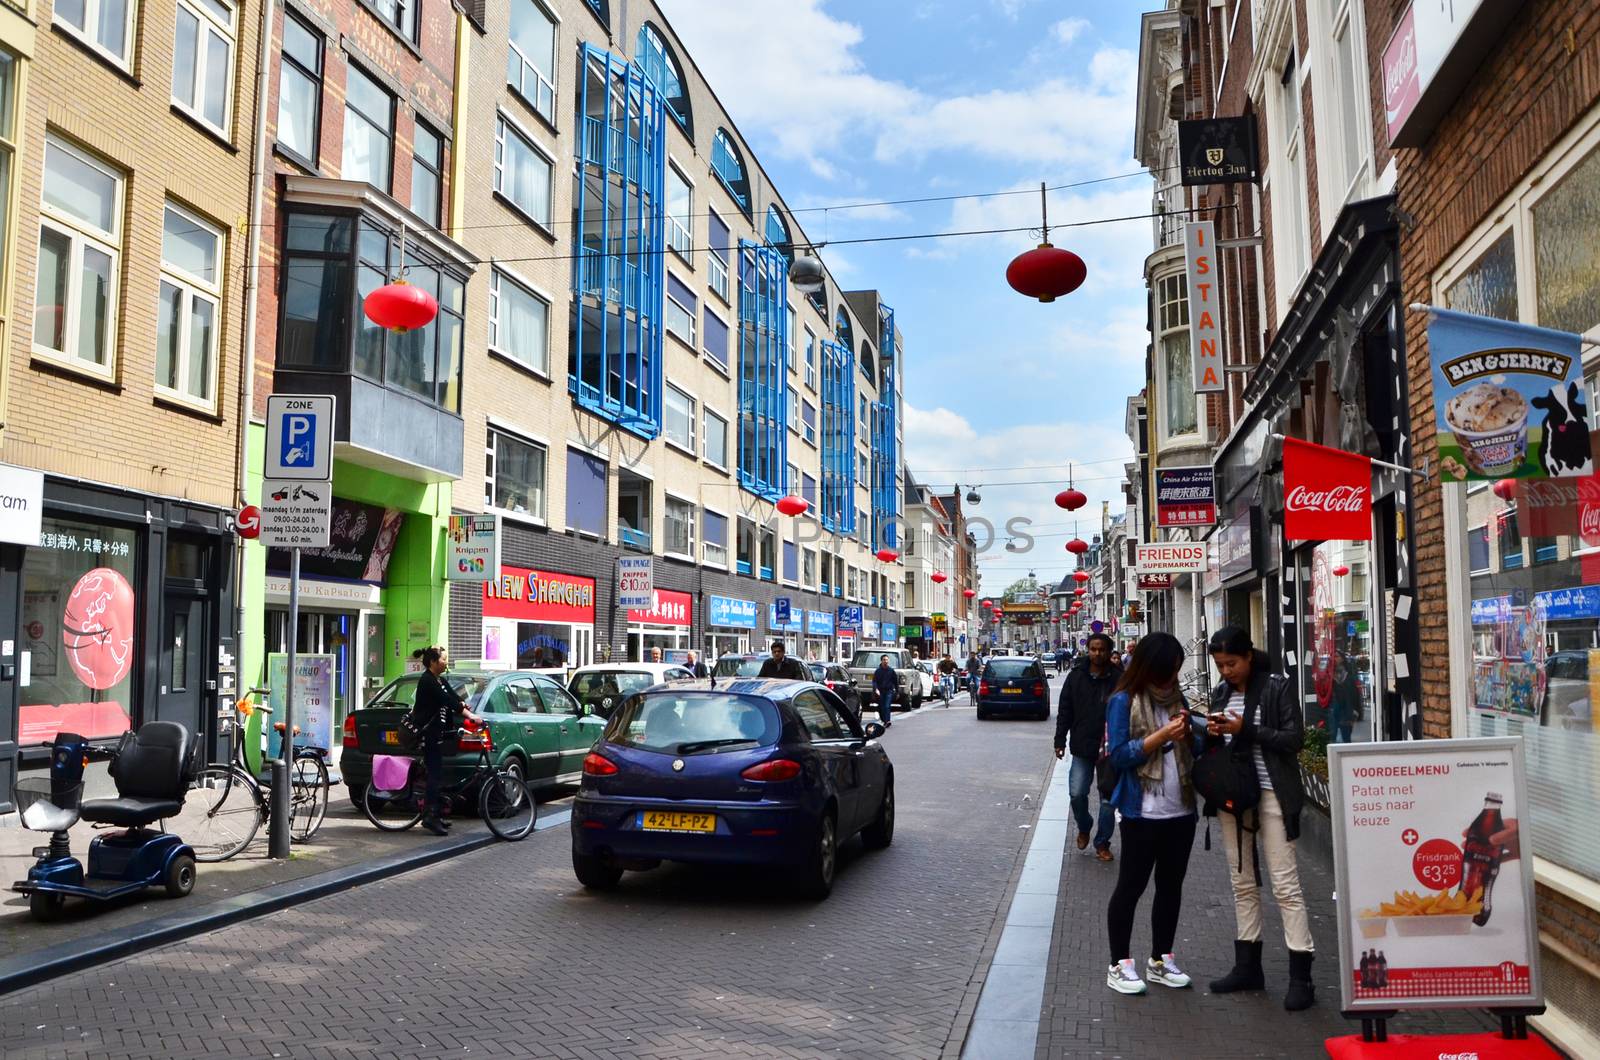 The Hague, Netherlands - May 8, 2015: People visit China town in The Hague by siraanamwong